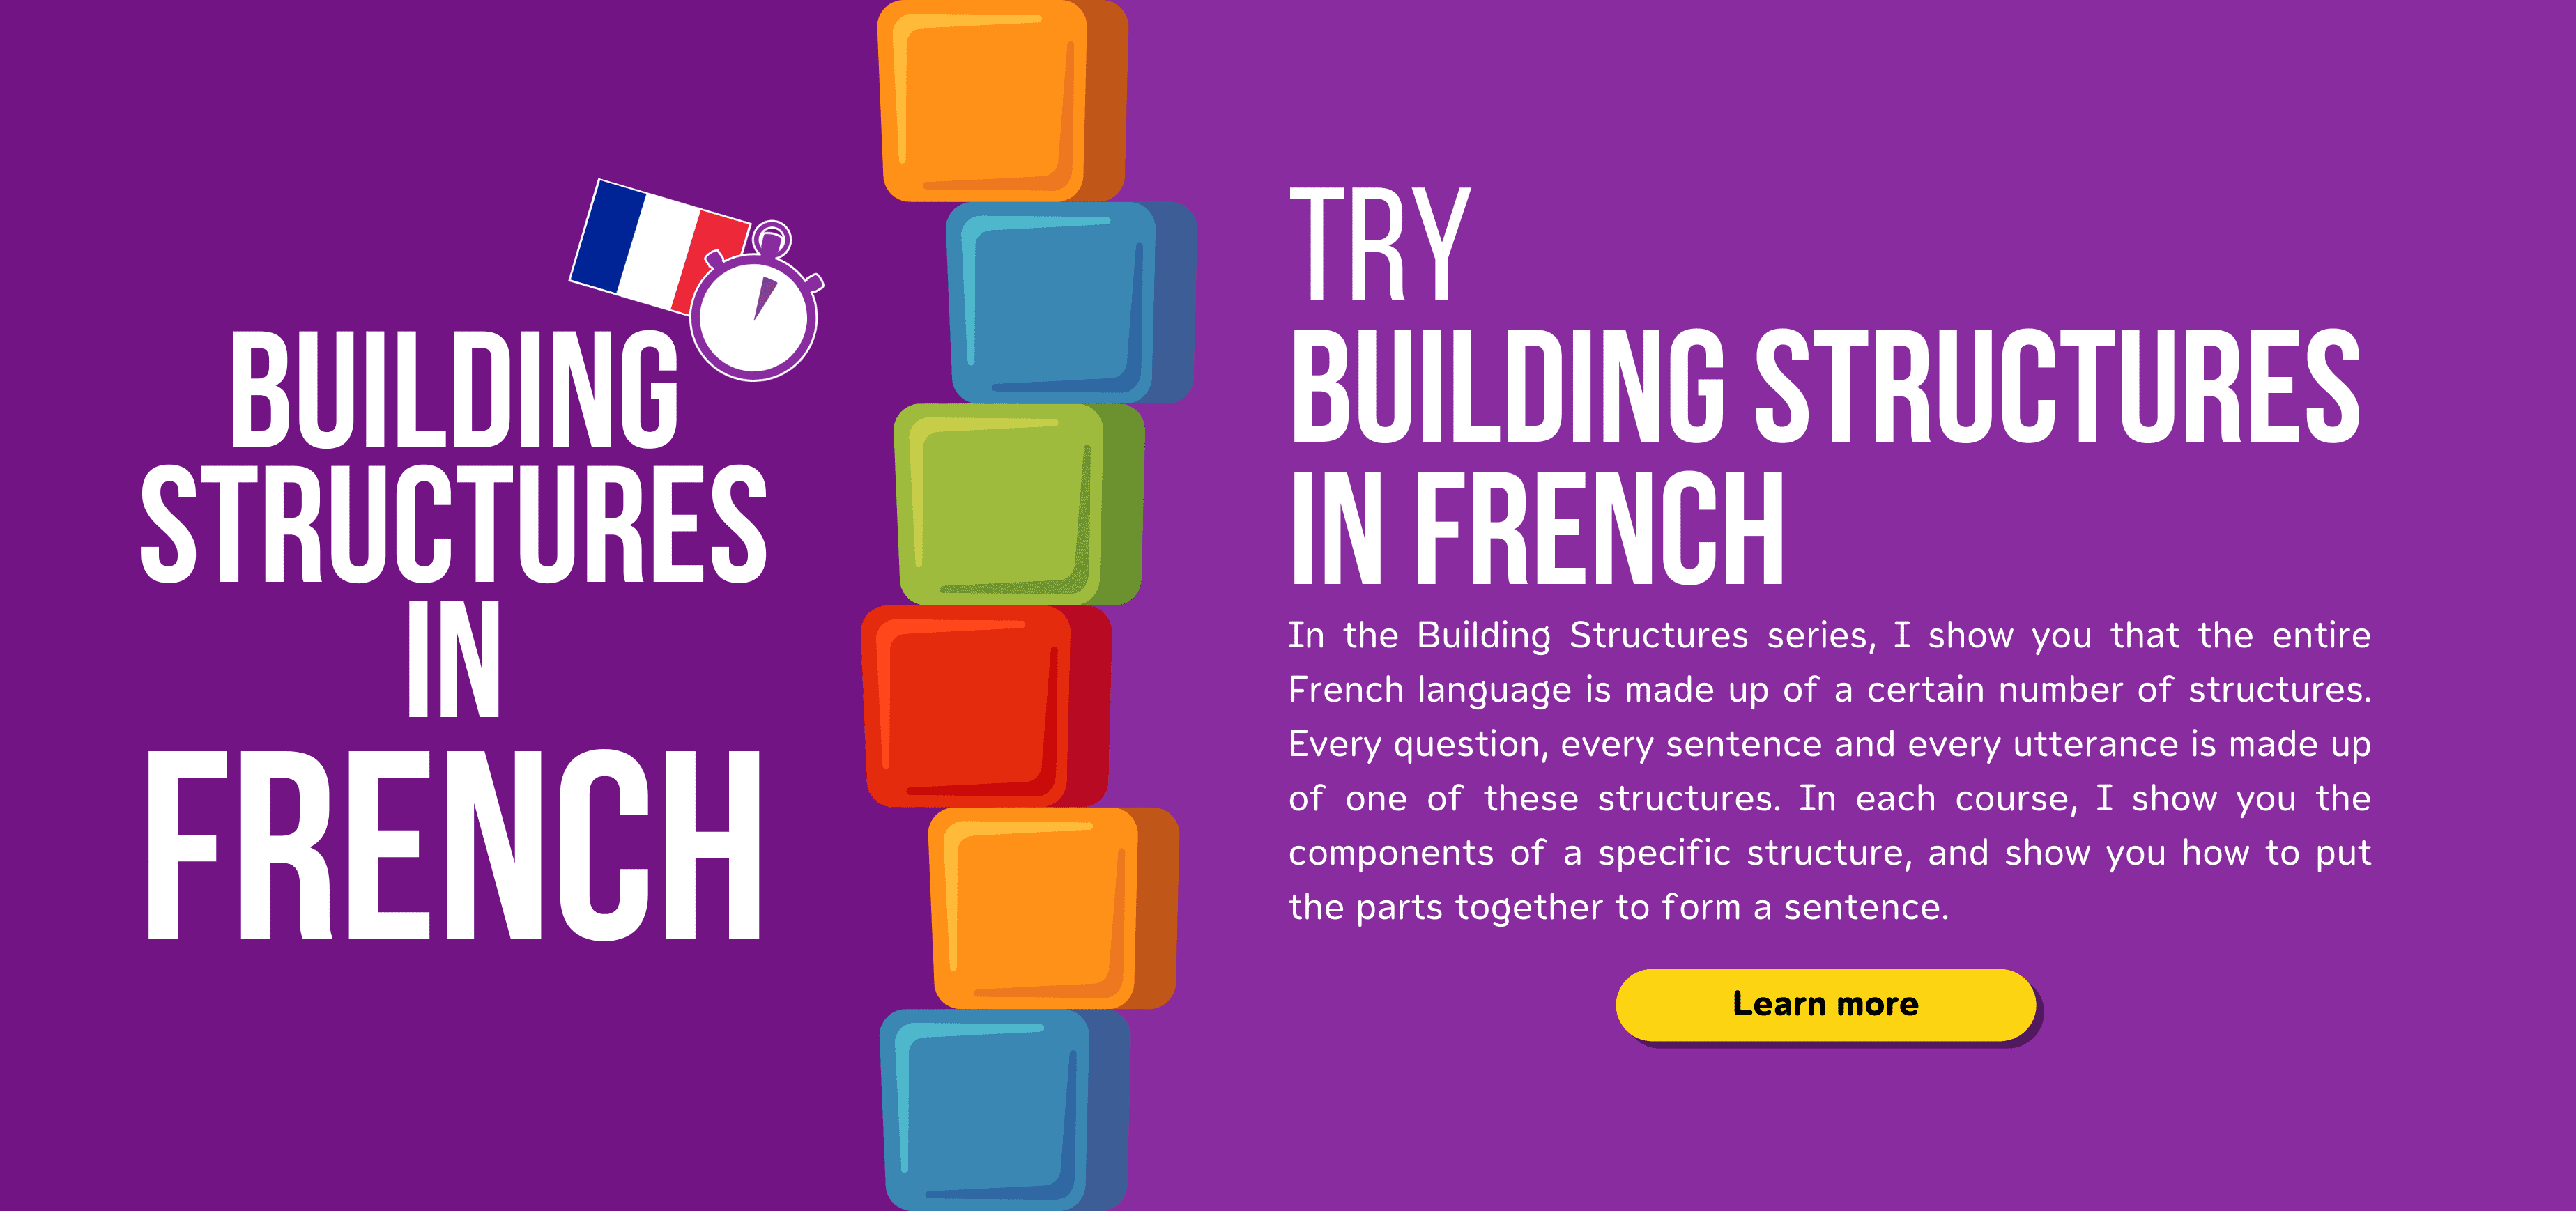 Try Building Structures in French